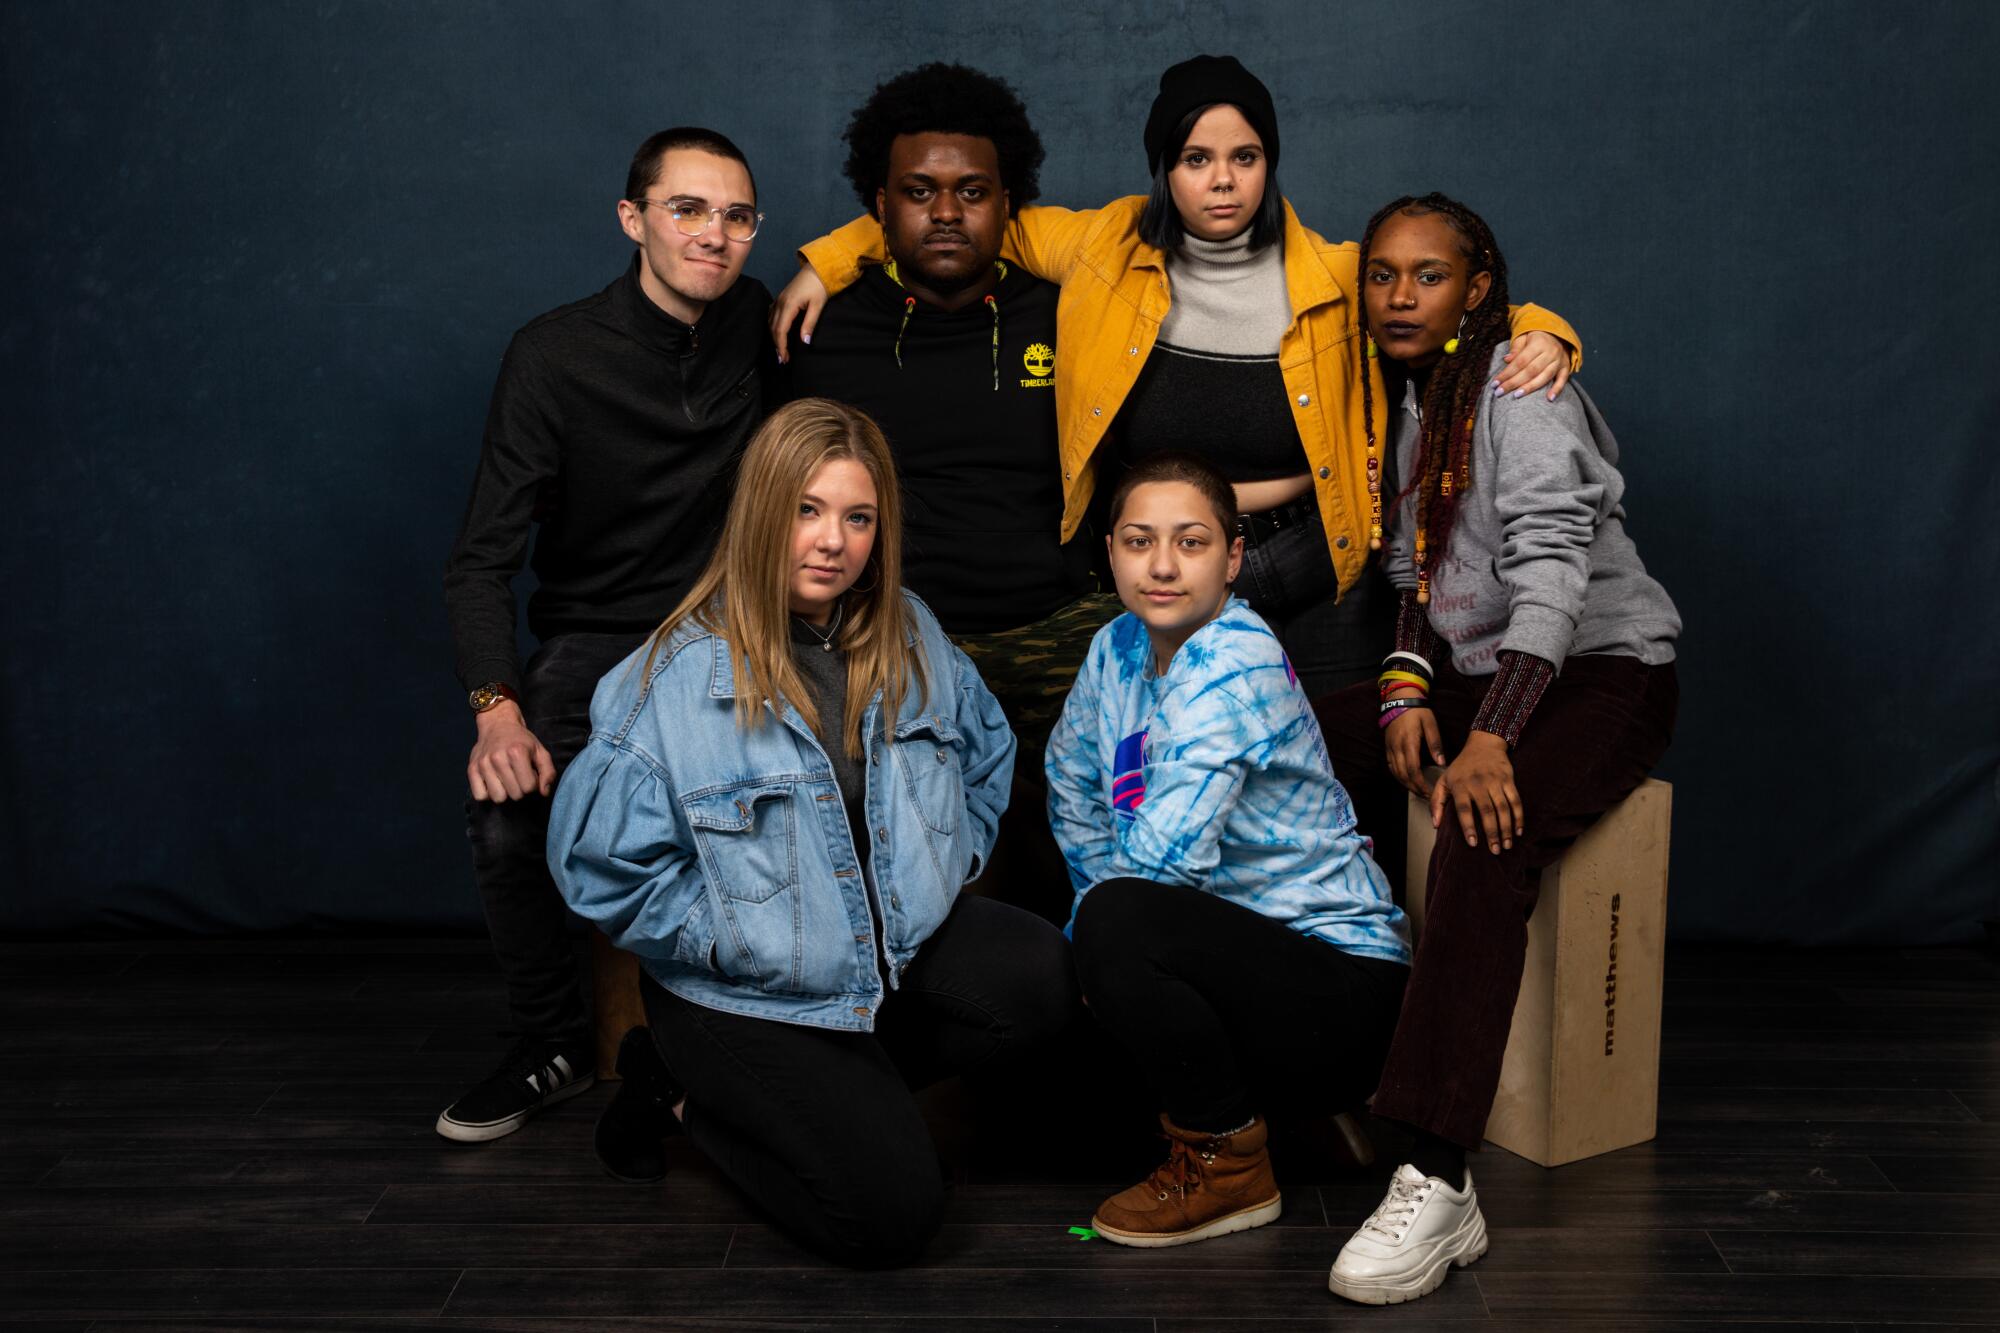 Subjects David Hogg, Jackie Corin, Alex King, Emma Gonzalez, Samantha Fuentes and Bria Smith of “Us Kids,” photographed in the L.A. Times Studio at the Sundance Film Festival.